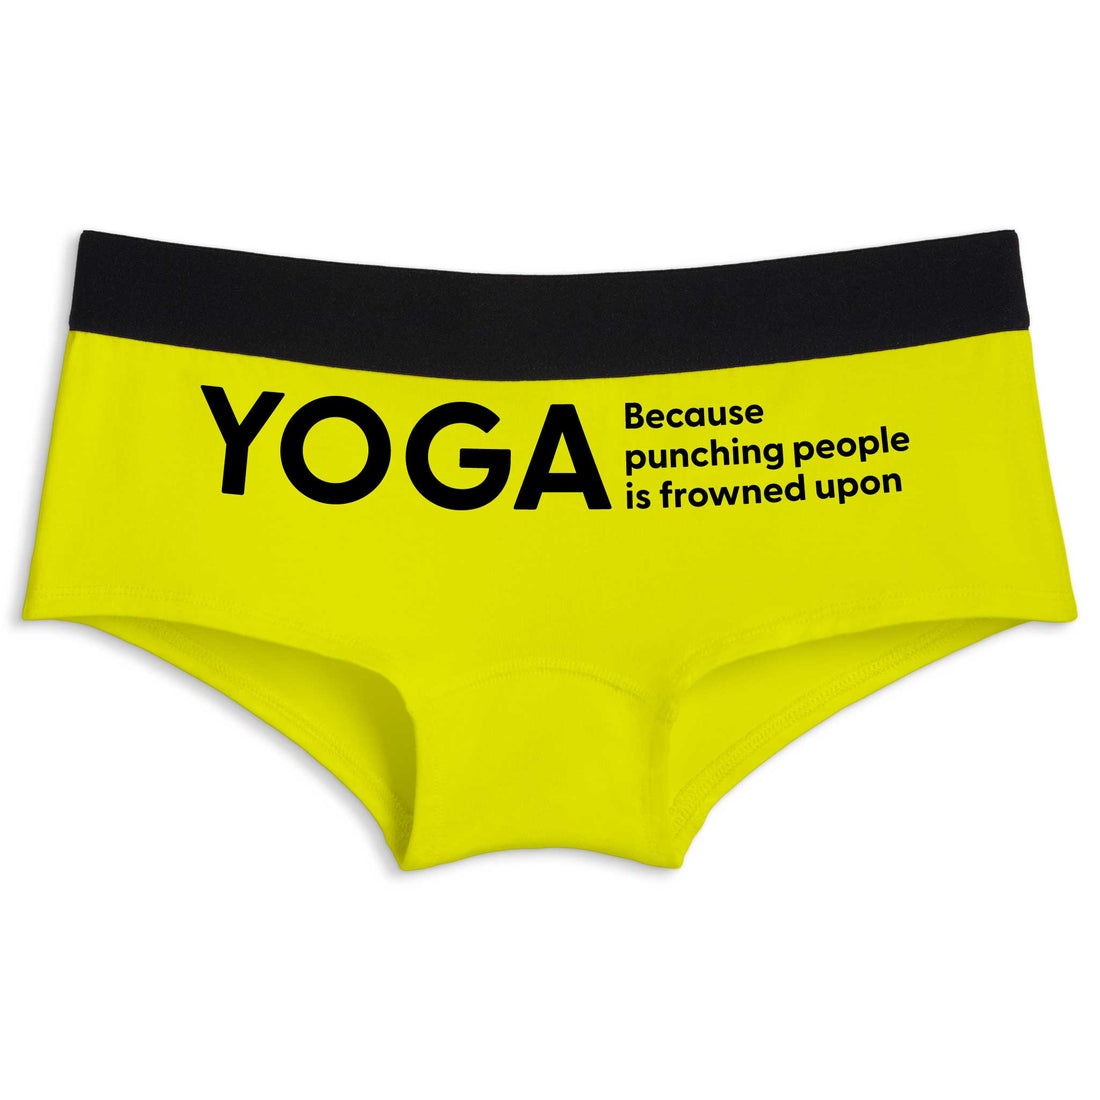 Yoga. Because punching people is frowned upon | Boyshort underwear